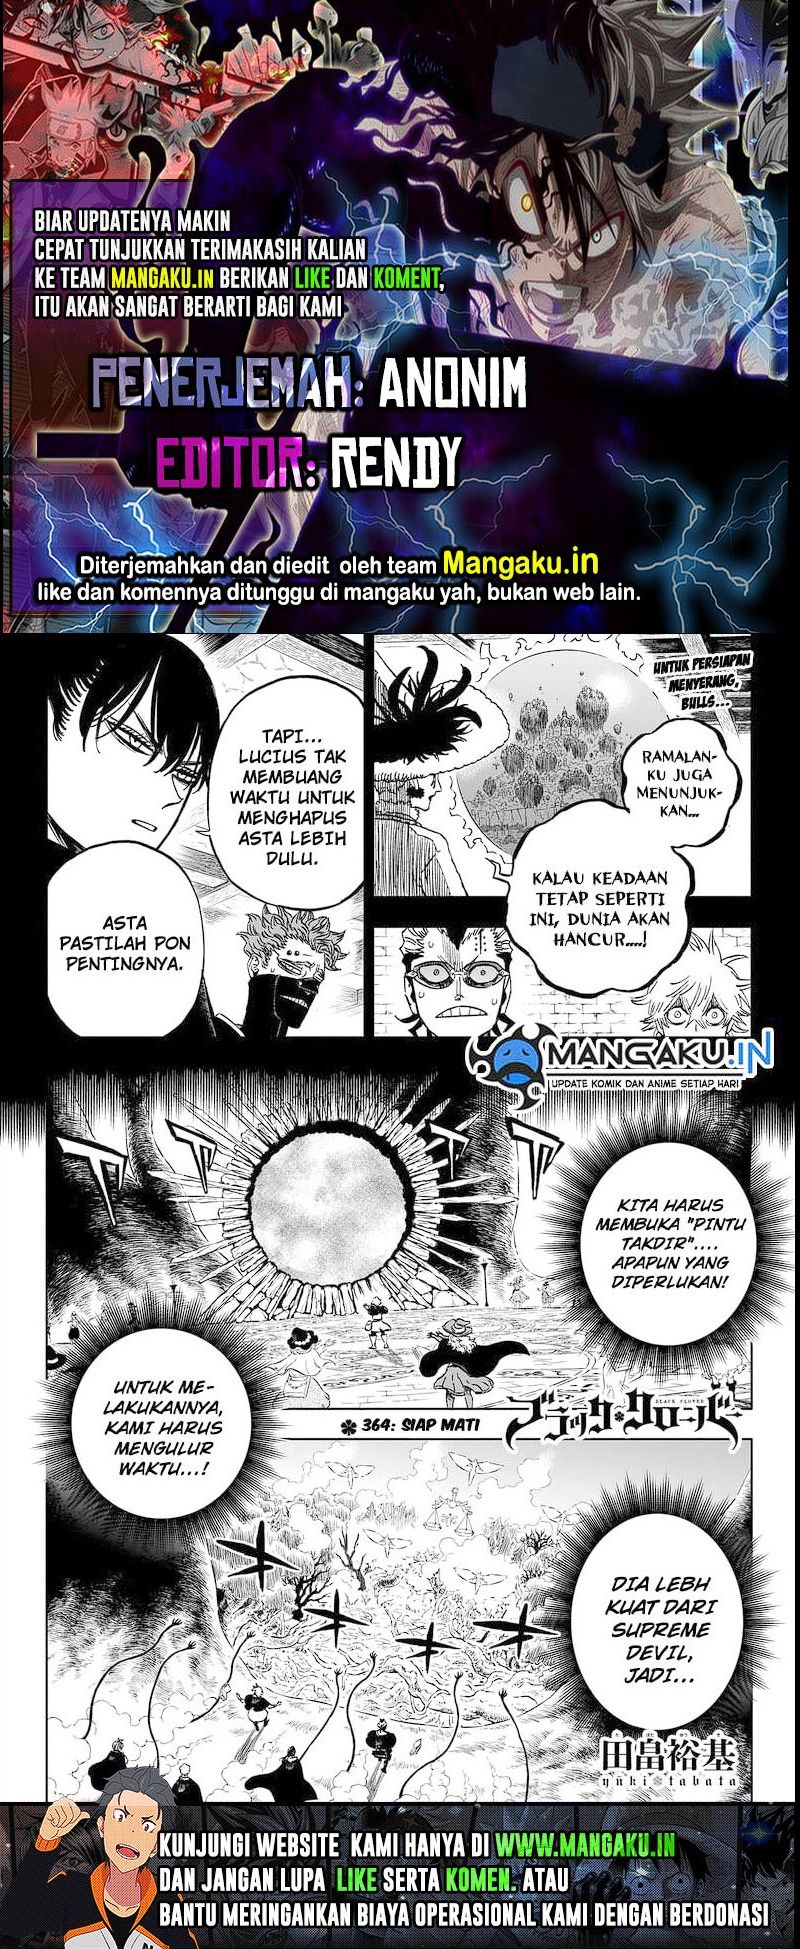 Black Clover: Chapter 364 - Page 1